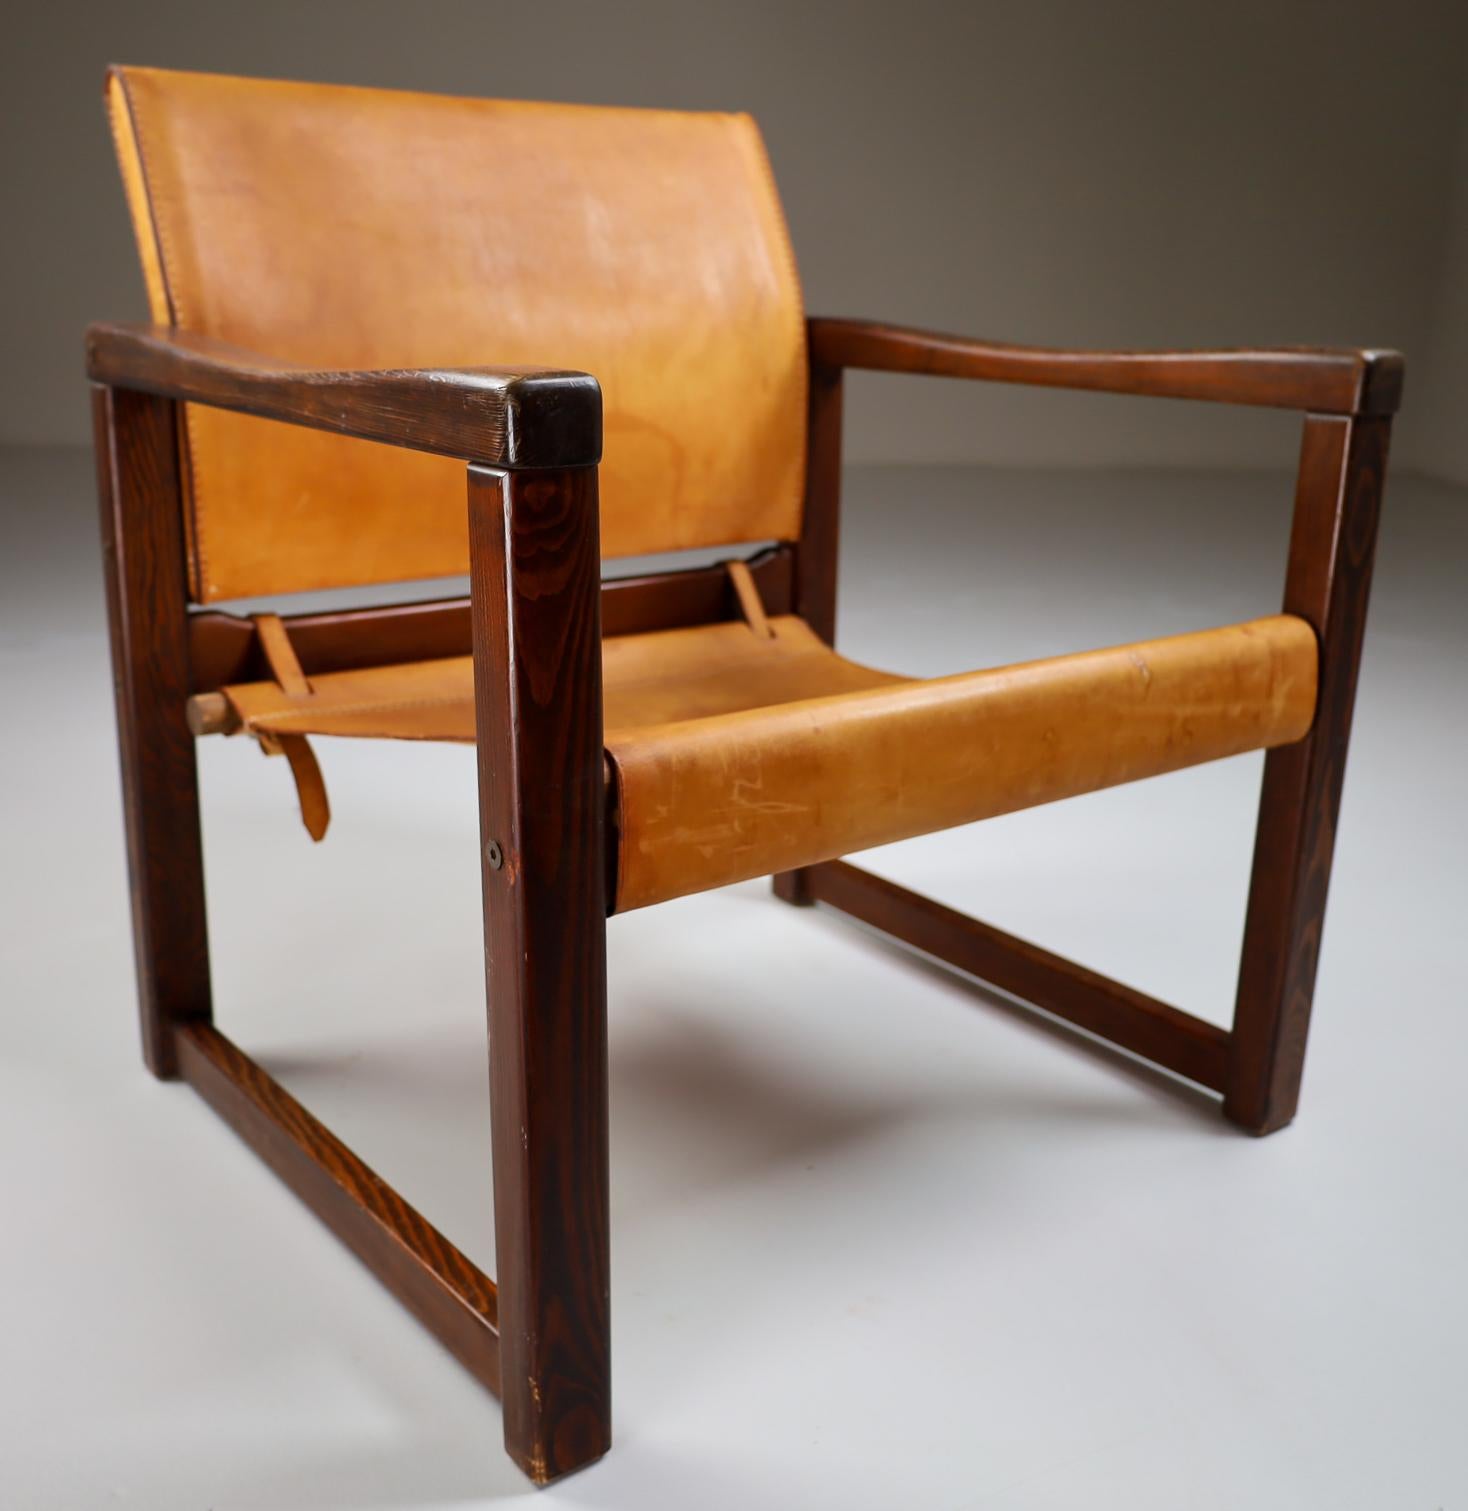 Safari lounge chair in absolutely gorgeous patinated cognac saddle leather and solid pinewood, circa 1970s. The thick saddle leather is beautifully patinated during use and age and shows interesting stitching. European Pine wood with thick saddle